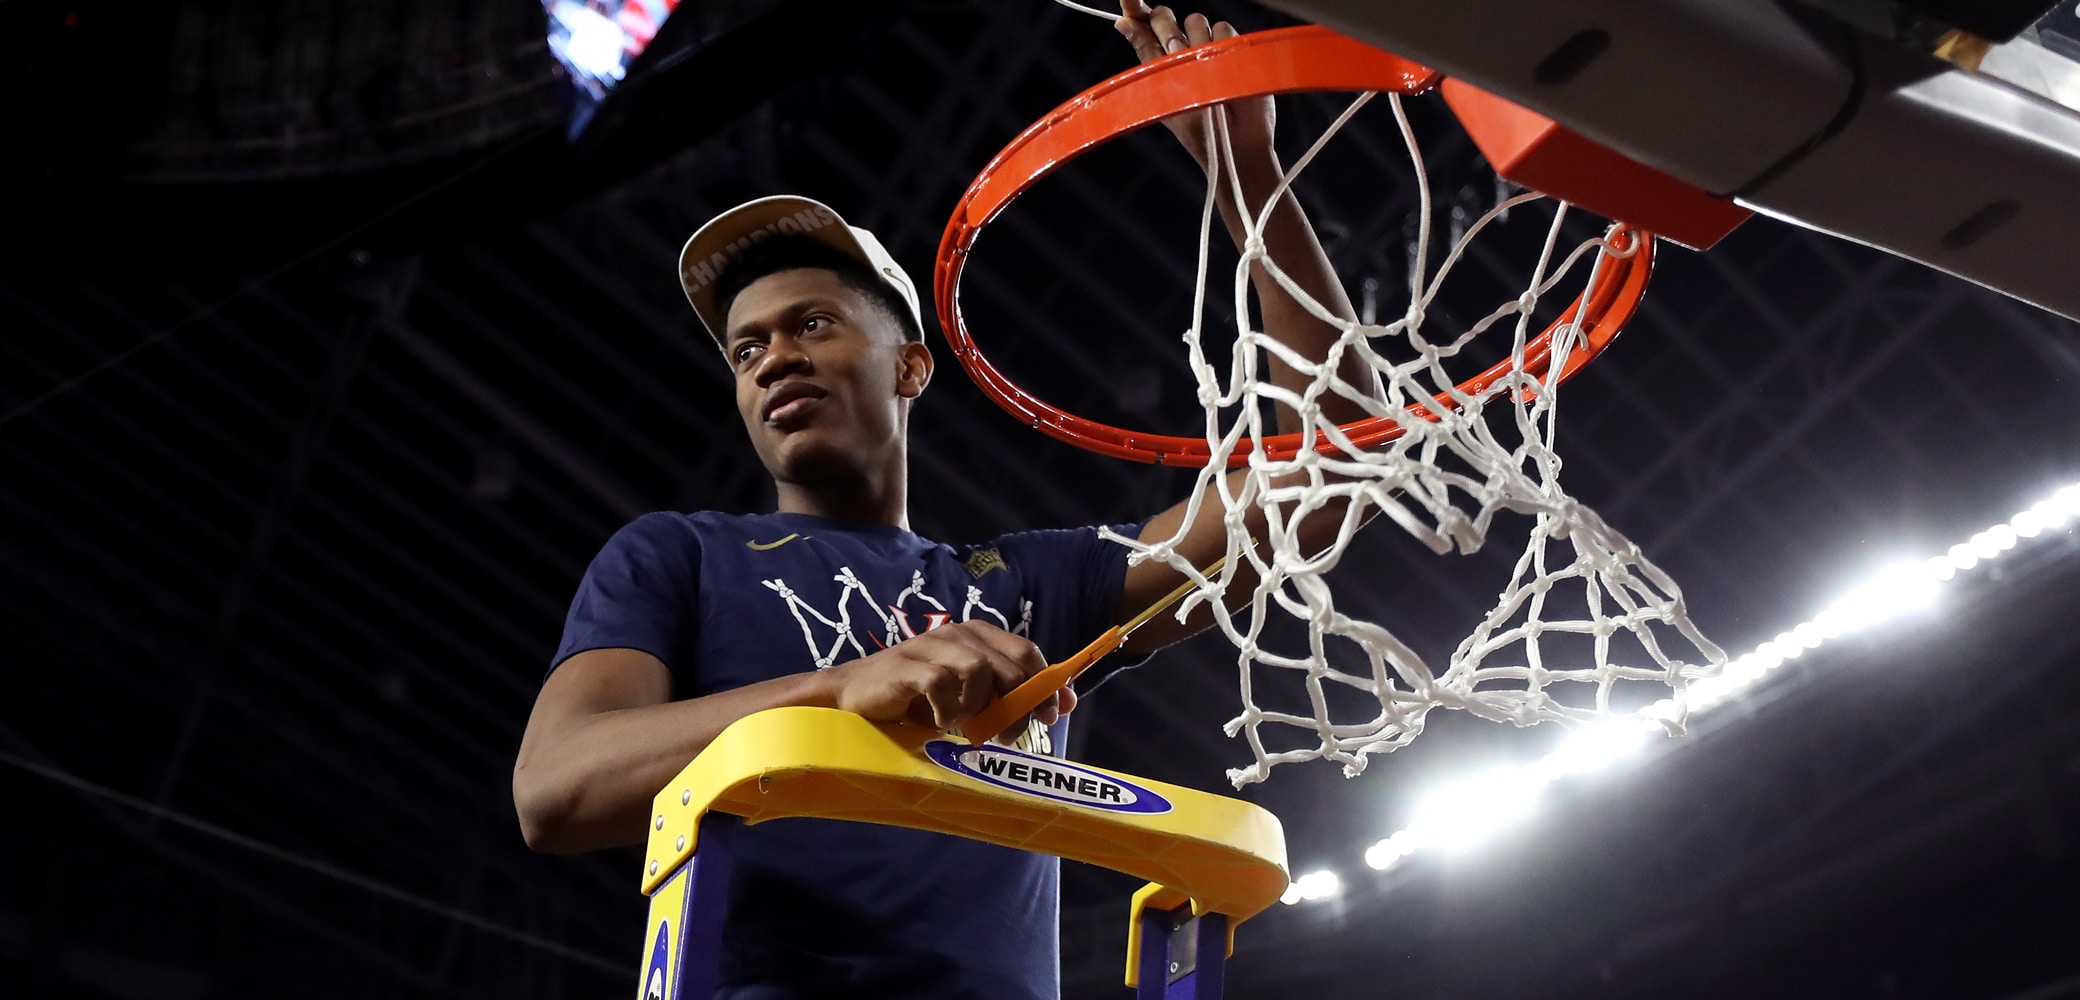 Who's next for UVA if De'Andre Hunter decides to enter the NBA